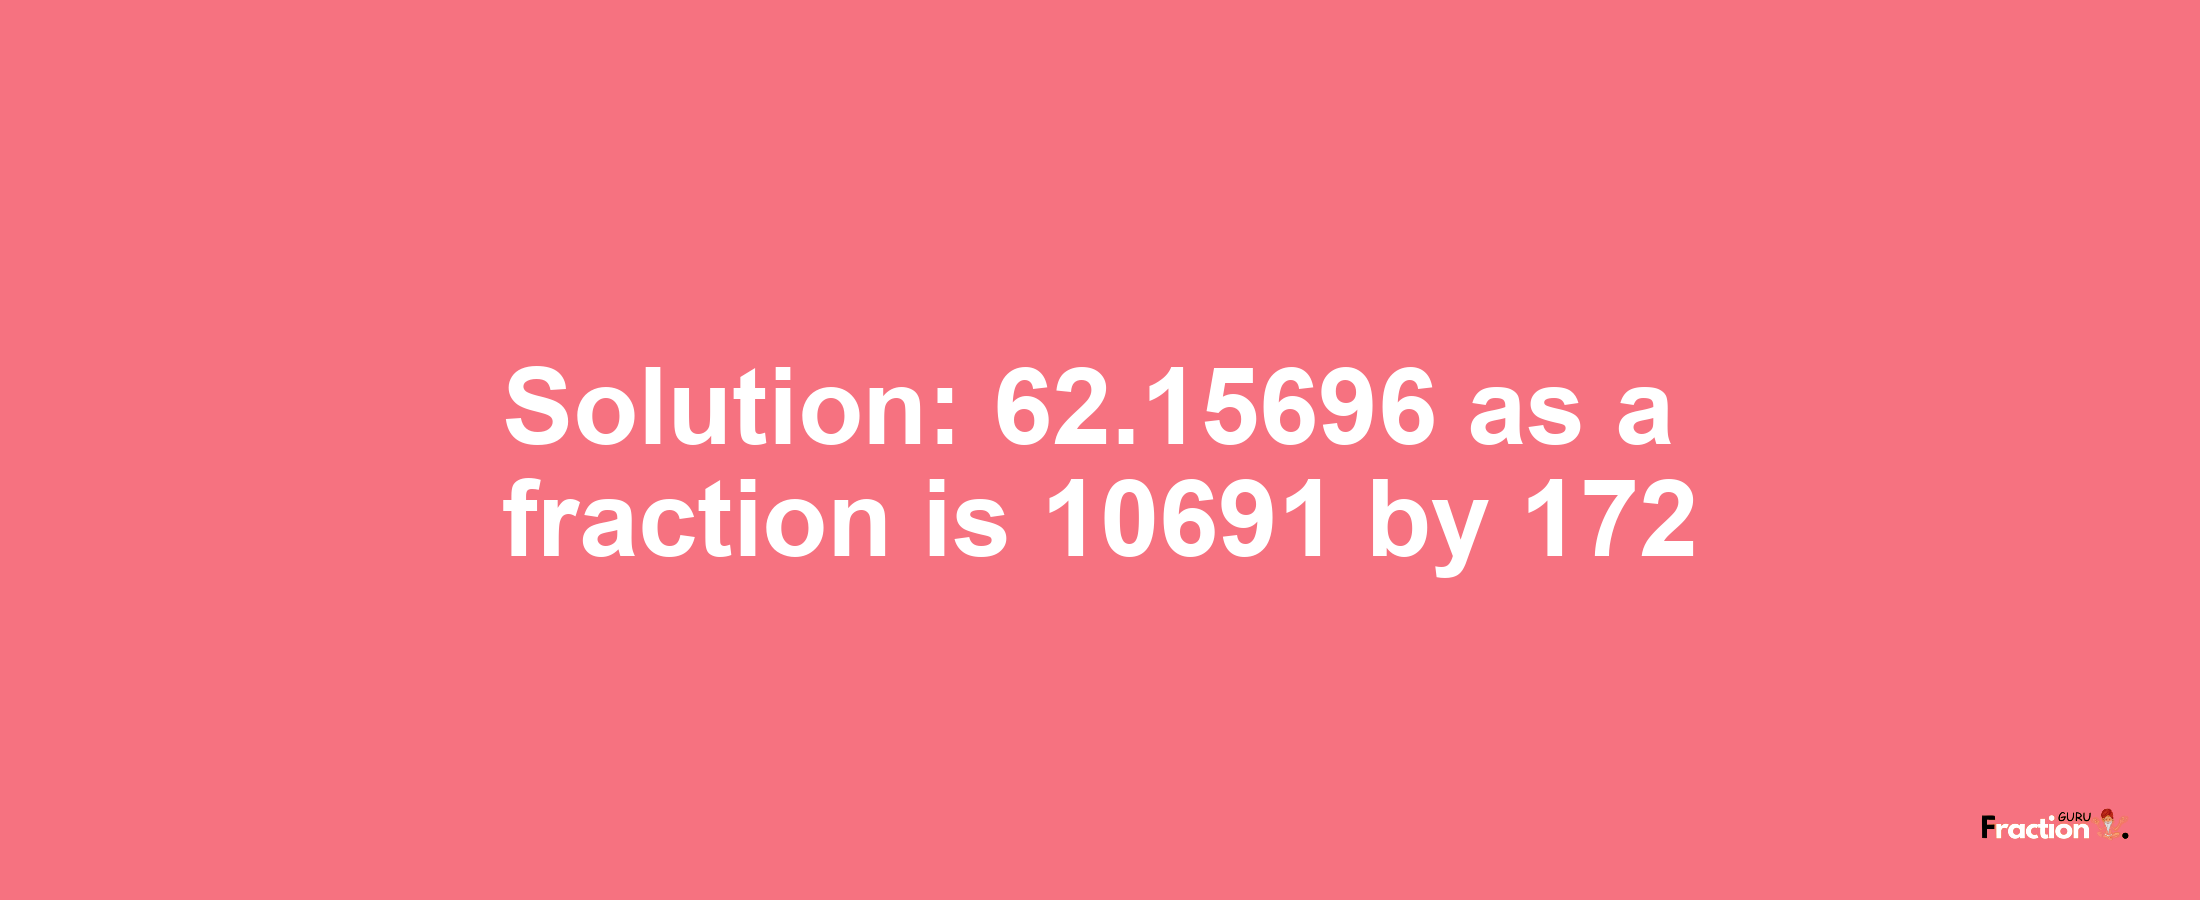 Solution:62.15696 as a fraction is 10691/172